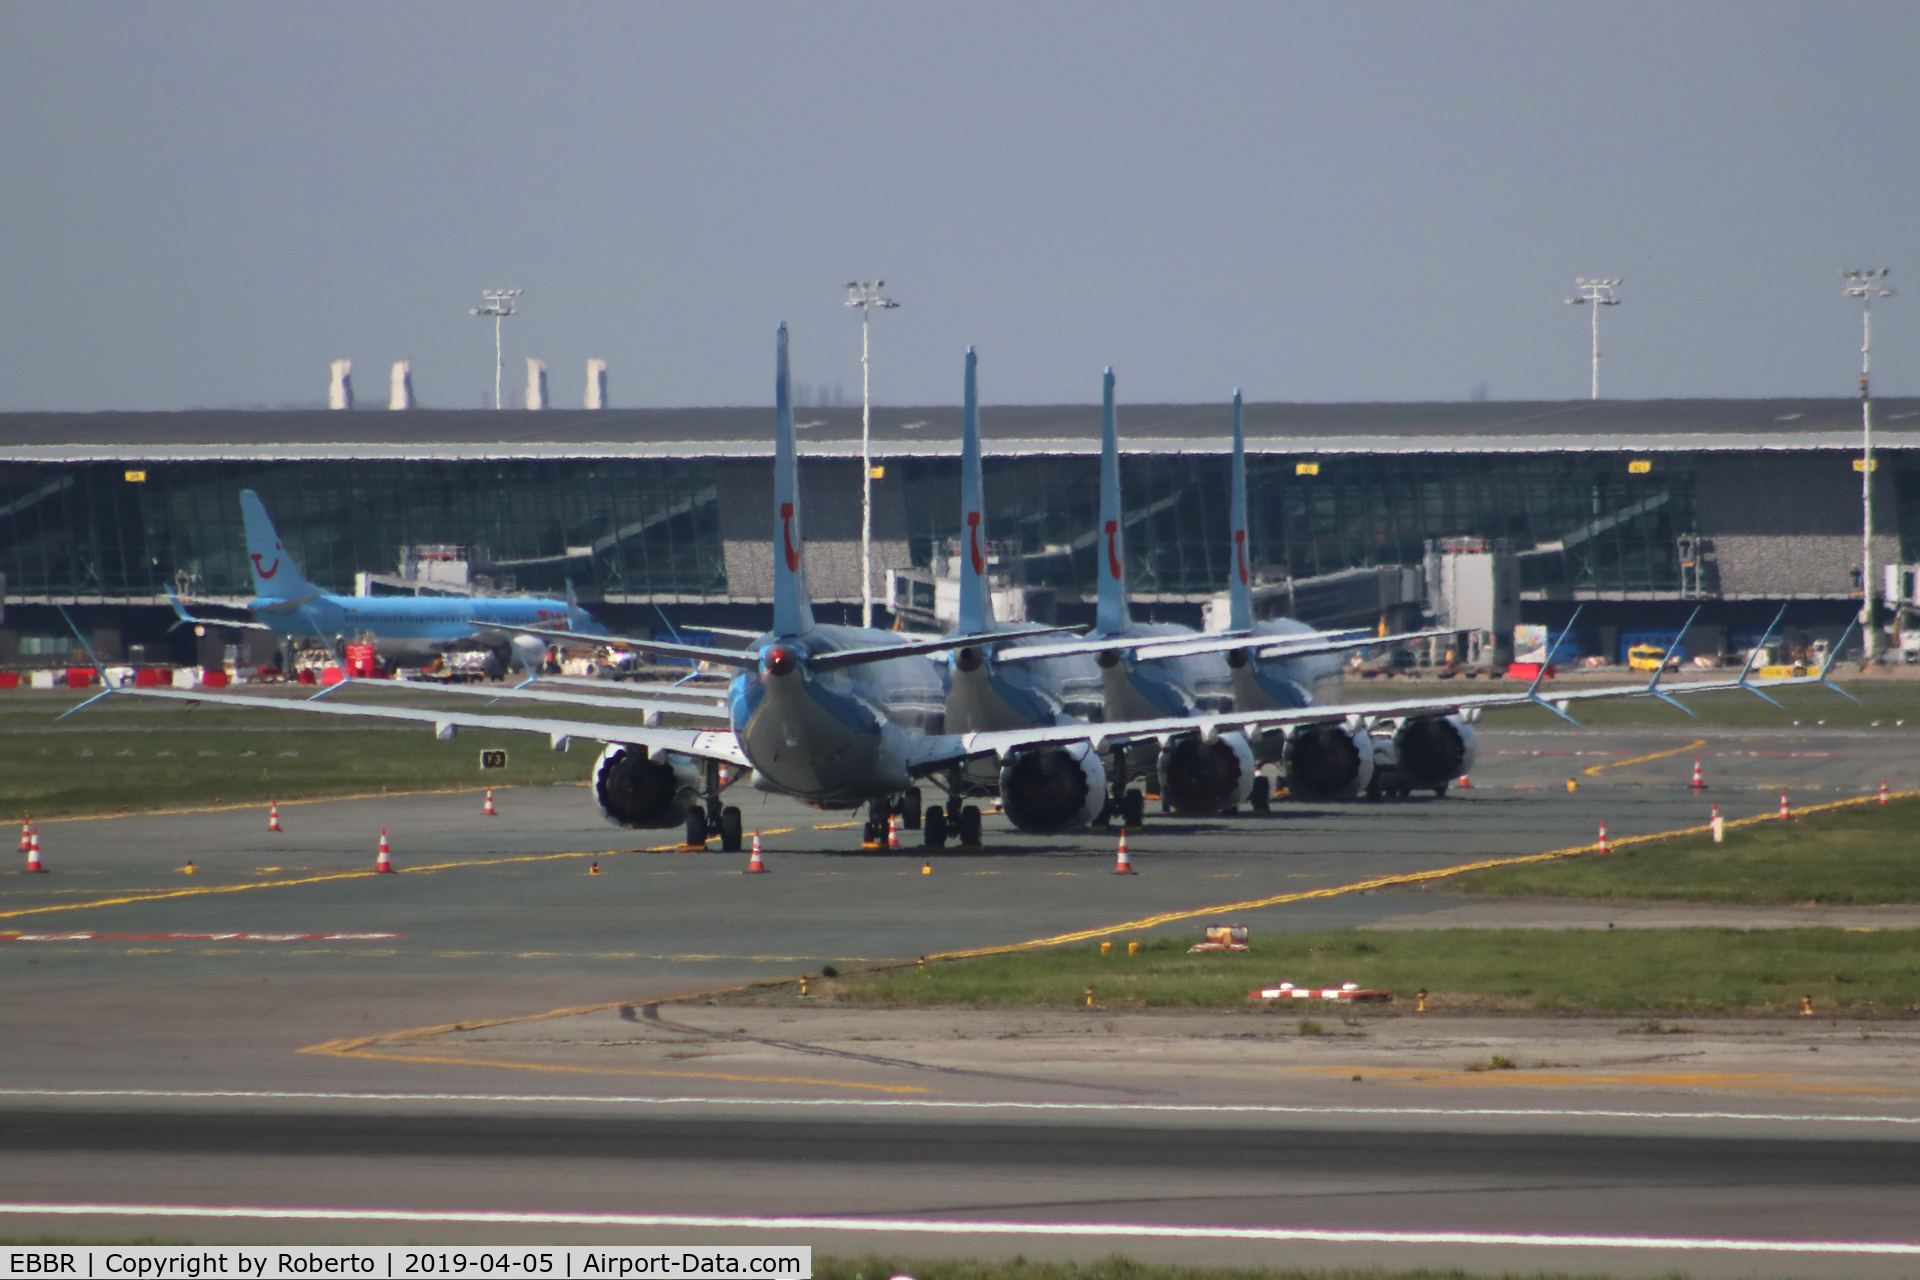 Brussels Airport, Brussels / Zaventem   Belgium (EBBR) - Here Boeing's 737-MAX belonging to TUI Airlines Belgium nailed on the ground in Brussels-Zaventem (EBBR) since the dramas of 2018.
